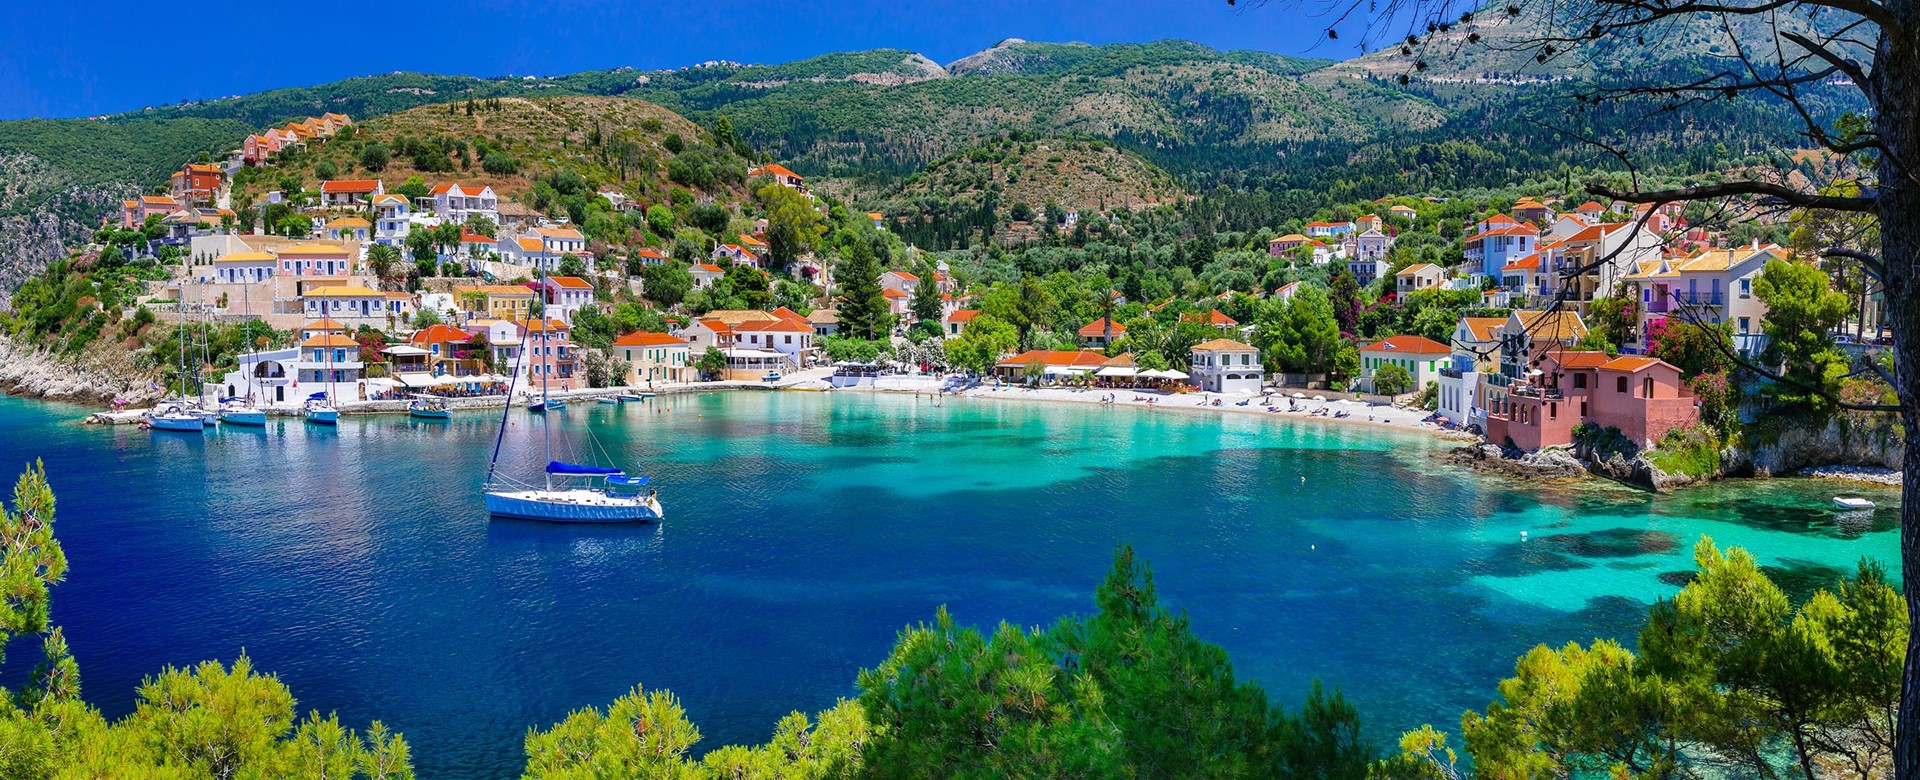 Looking down across the water into the village of Assos, Kefalonia, Greek Islands